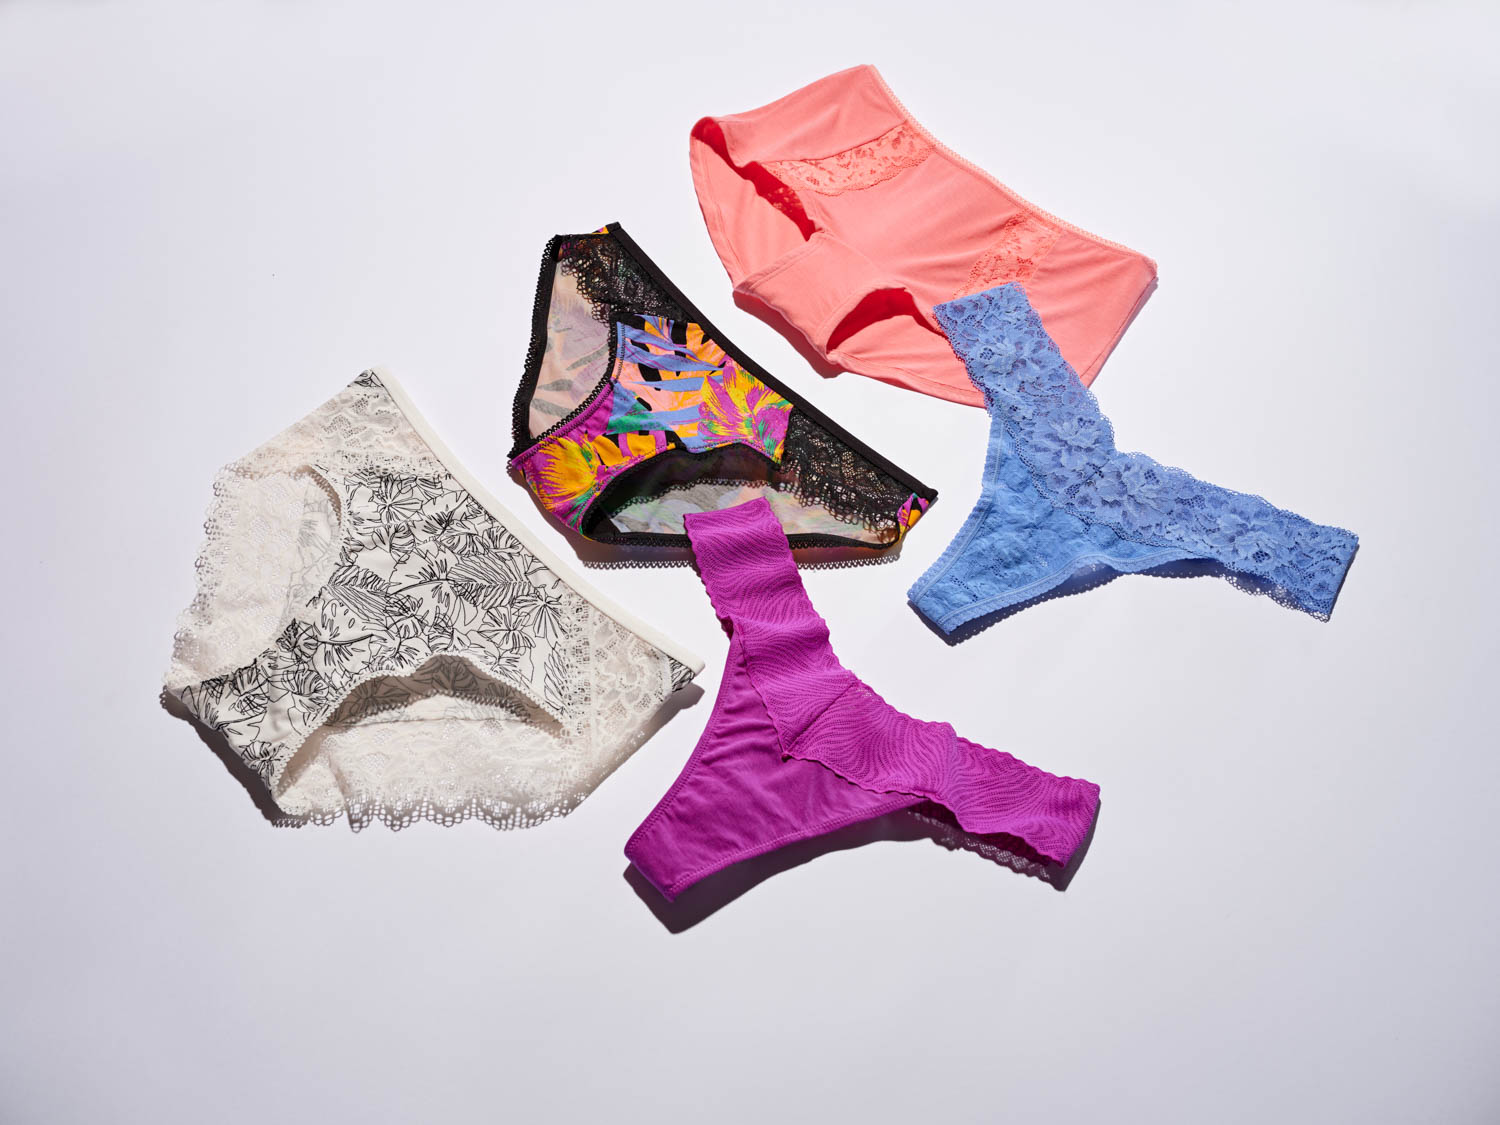 Soma<sup class=st-superscript>®</sup> laydown of women’s panty styles including brief, bikini, high-leg, and thong in various colors and prints.